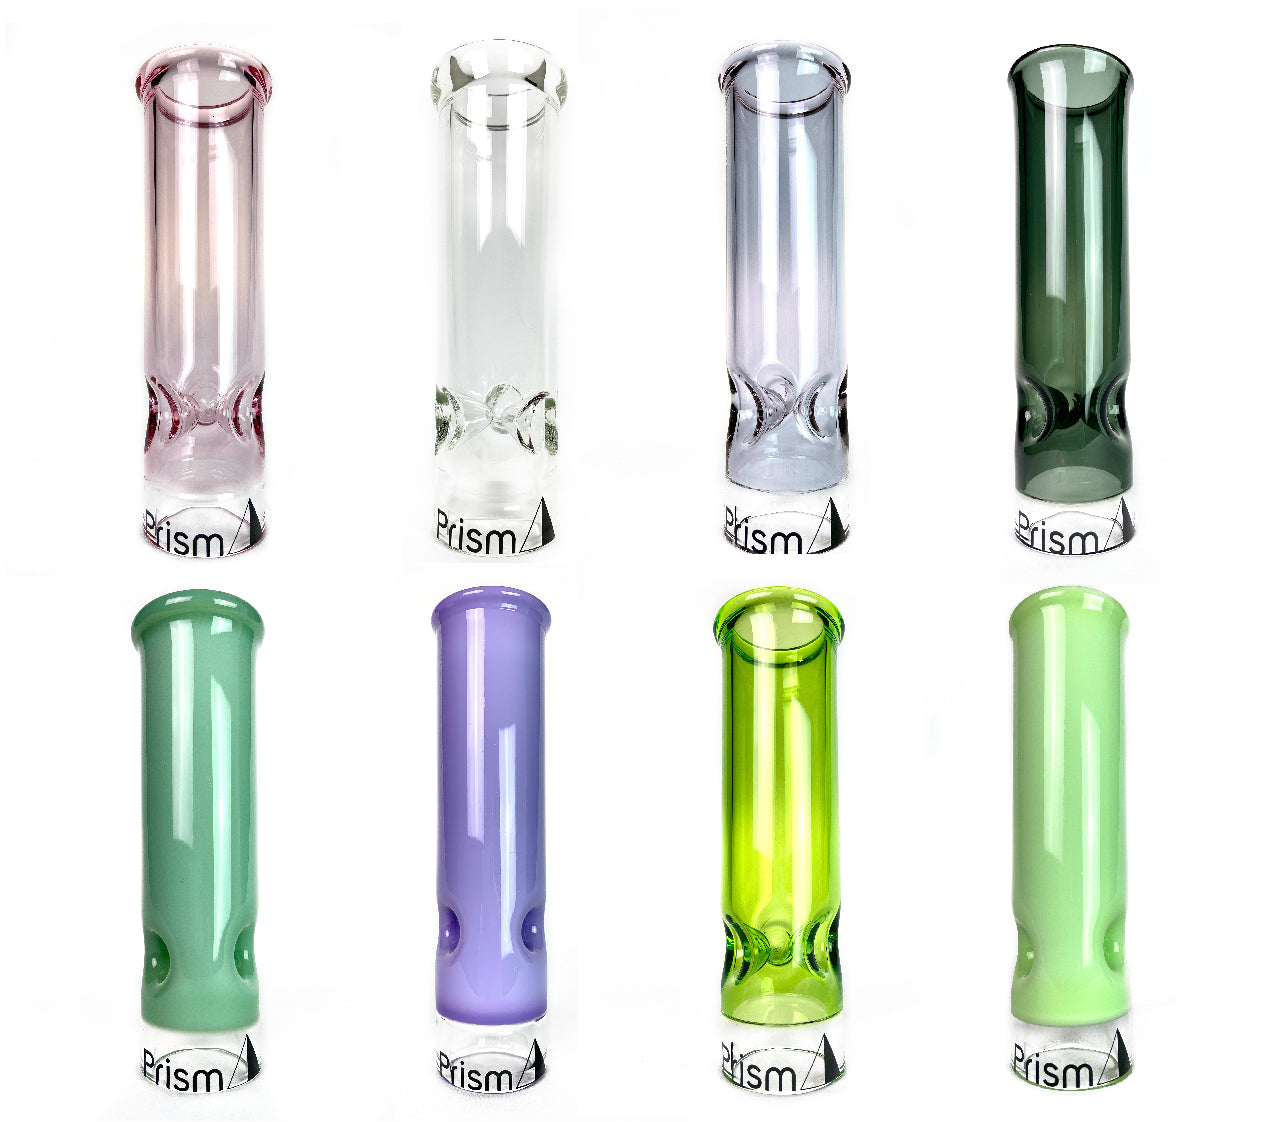 Prism addresses the issues of traditional waterpipes making a custom bong possible. With a variety of bong styles you can create your own custom bong whether its a tall bong or small bong. Also, it’s now easy to clean your bong and travel with your bong.